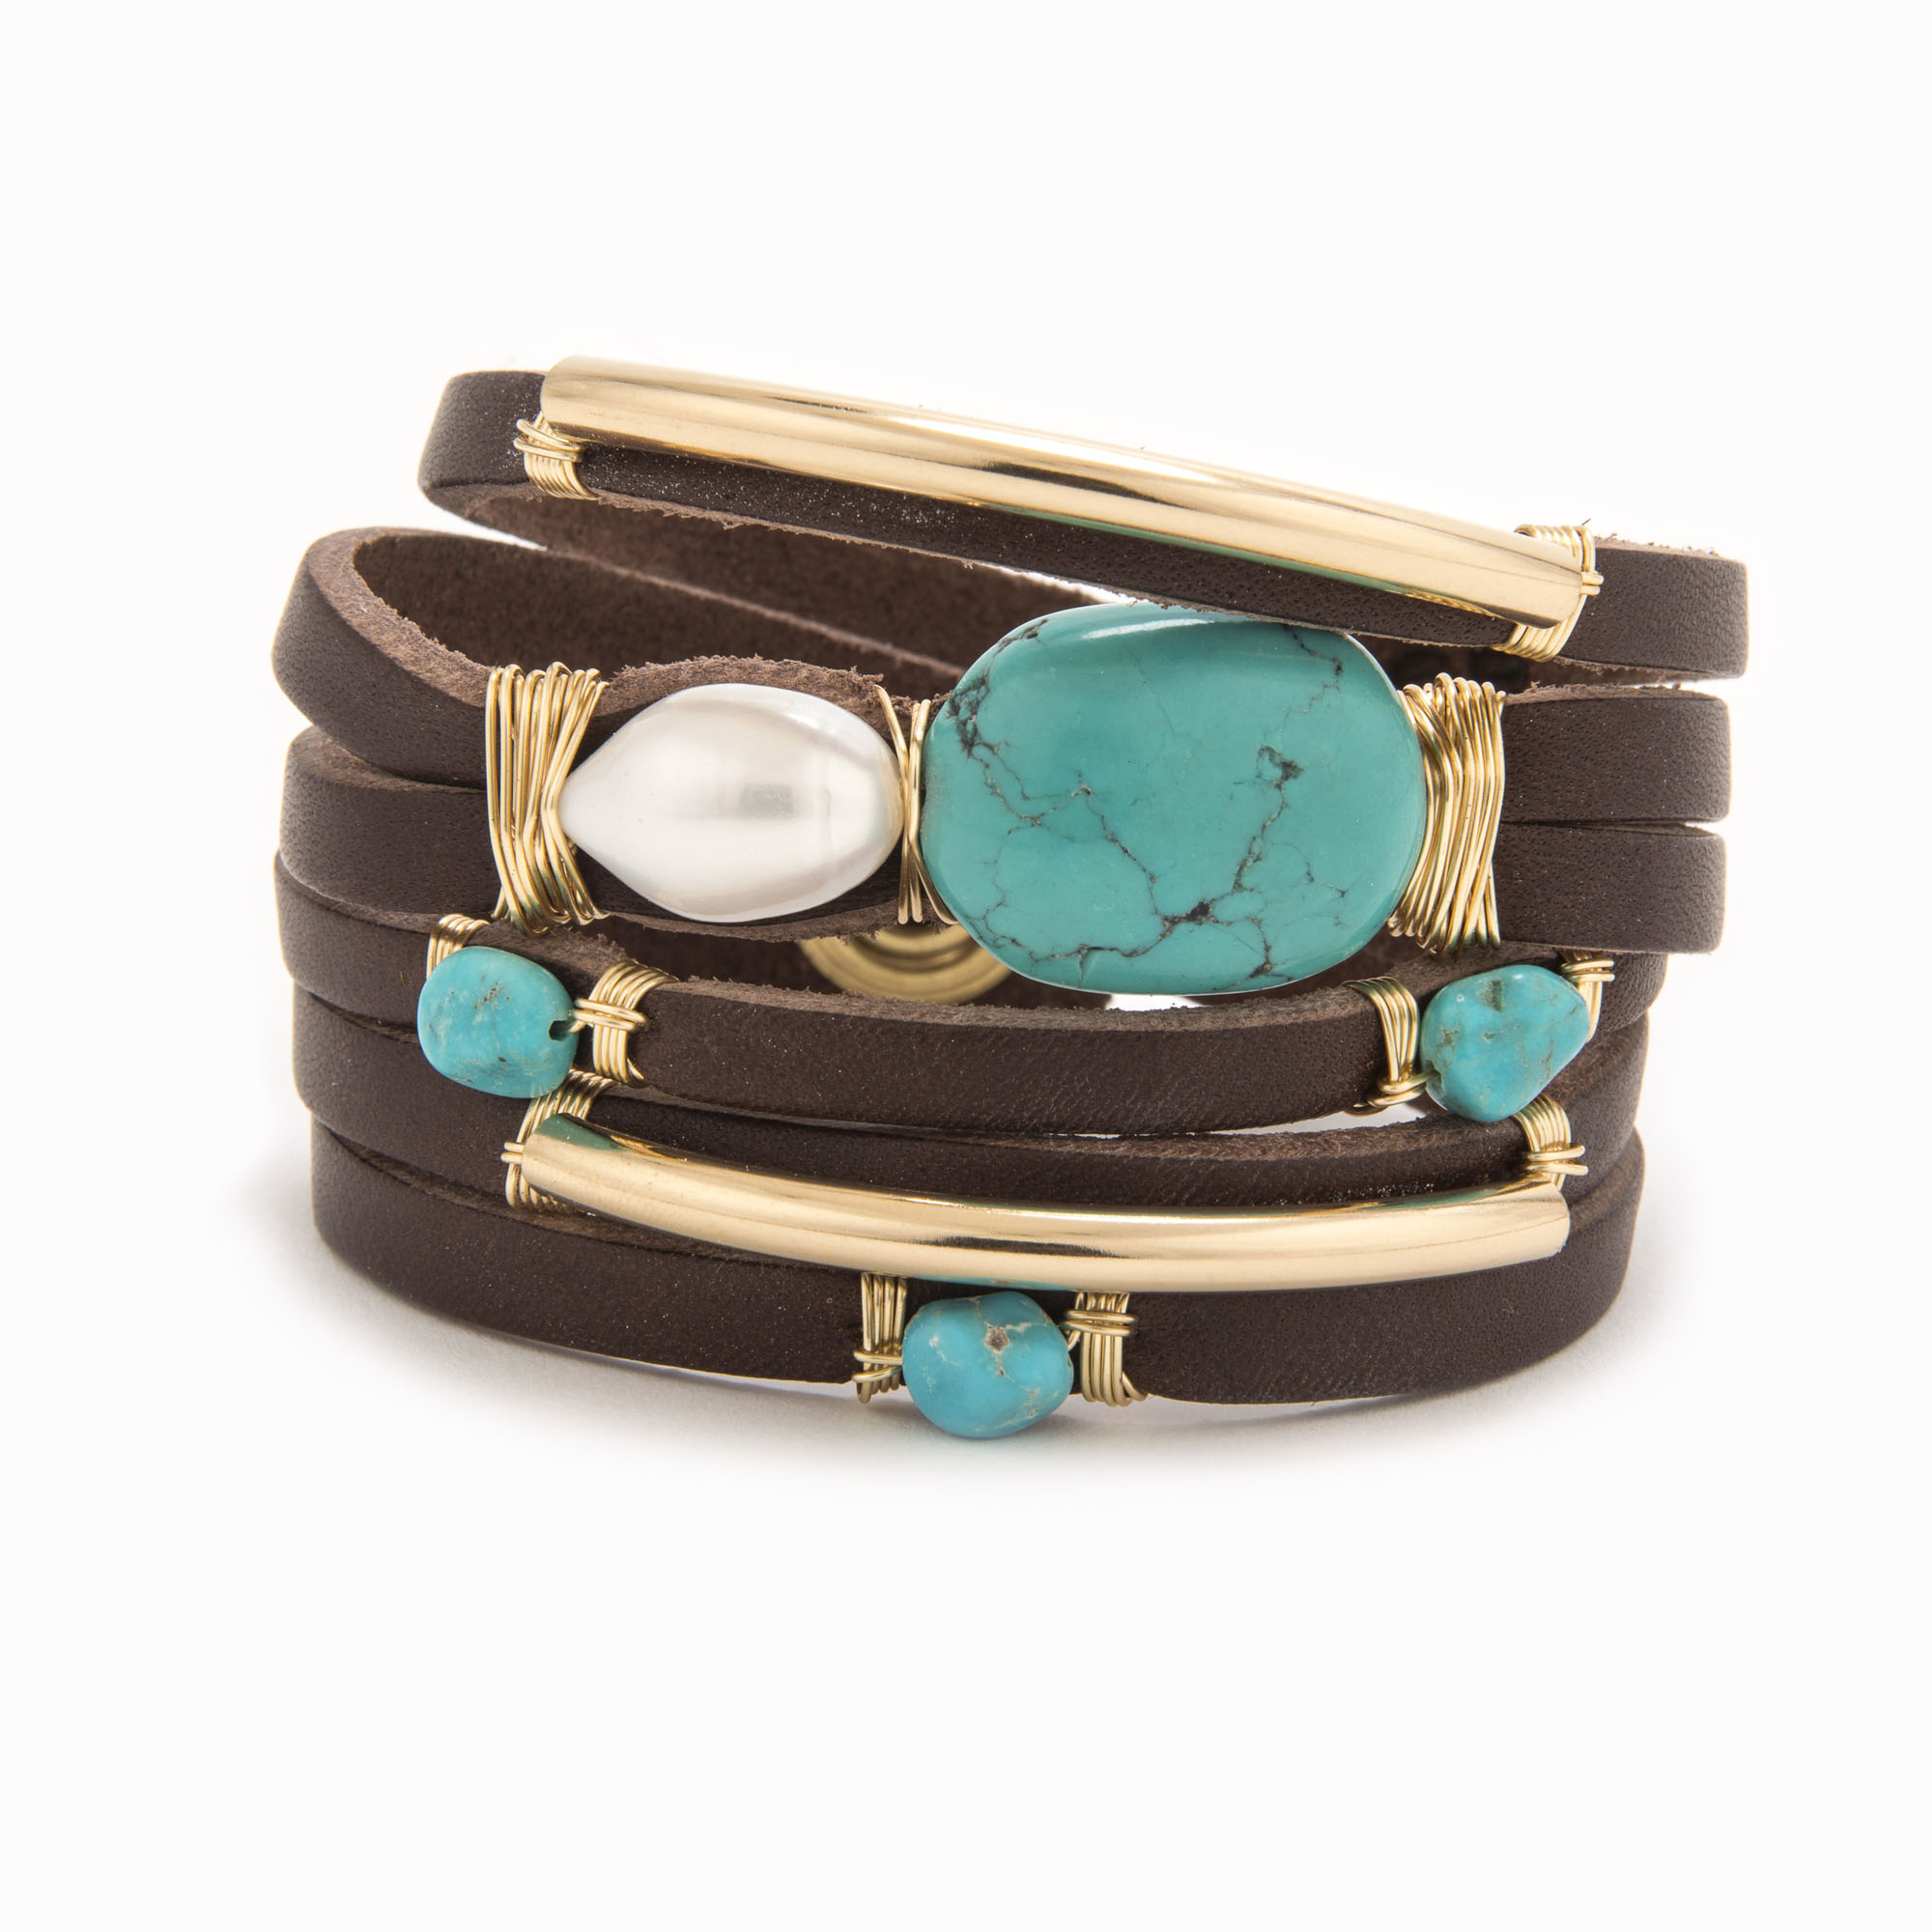 Featured image for “Paloma Leather Shred Bracelet”